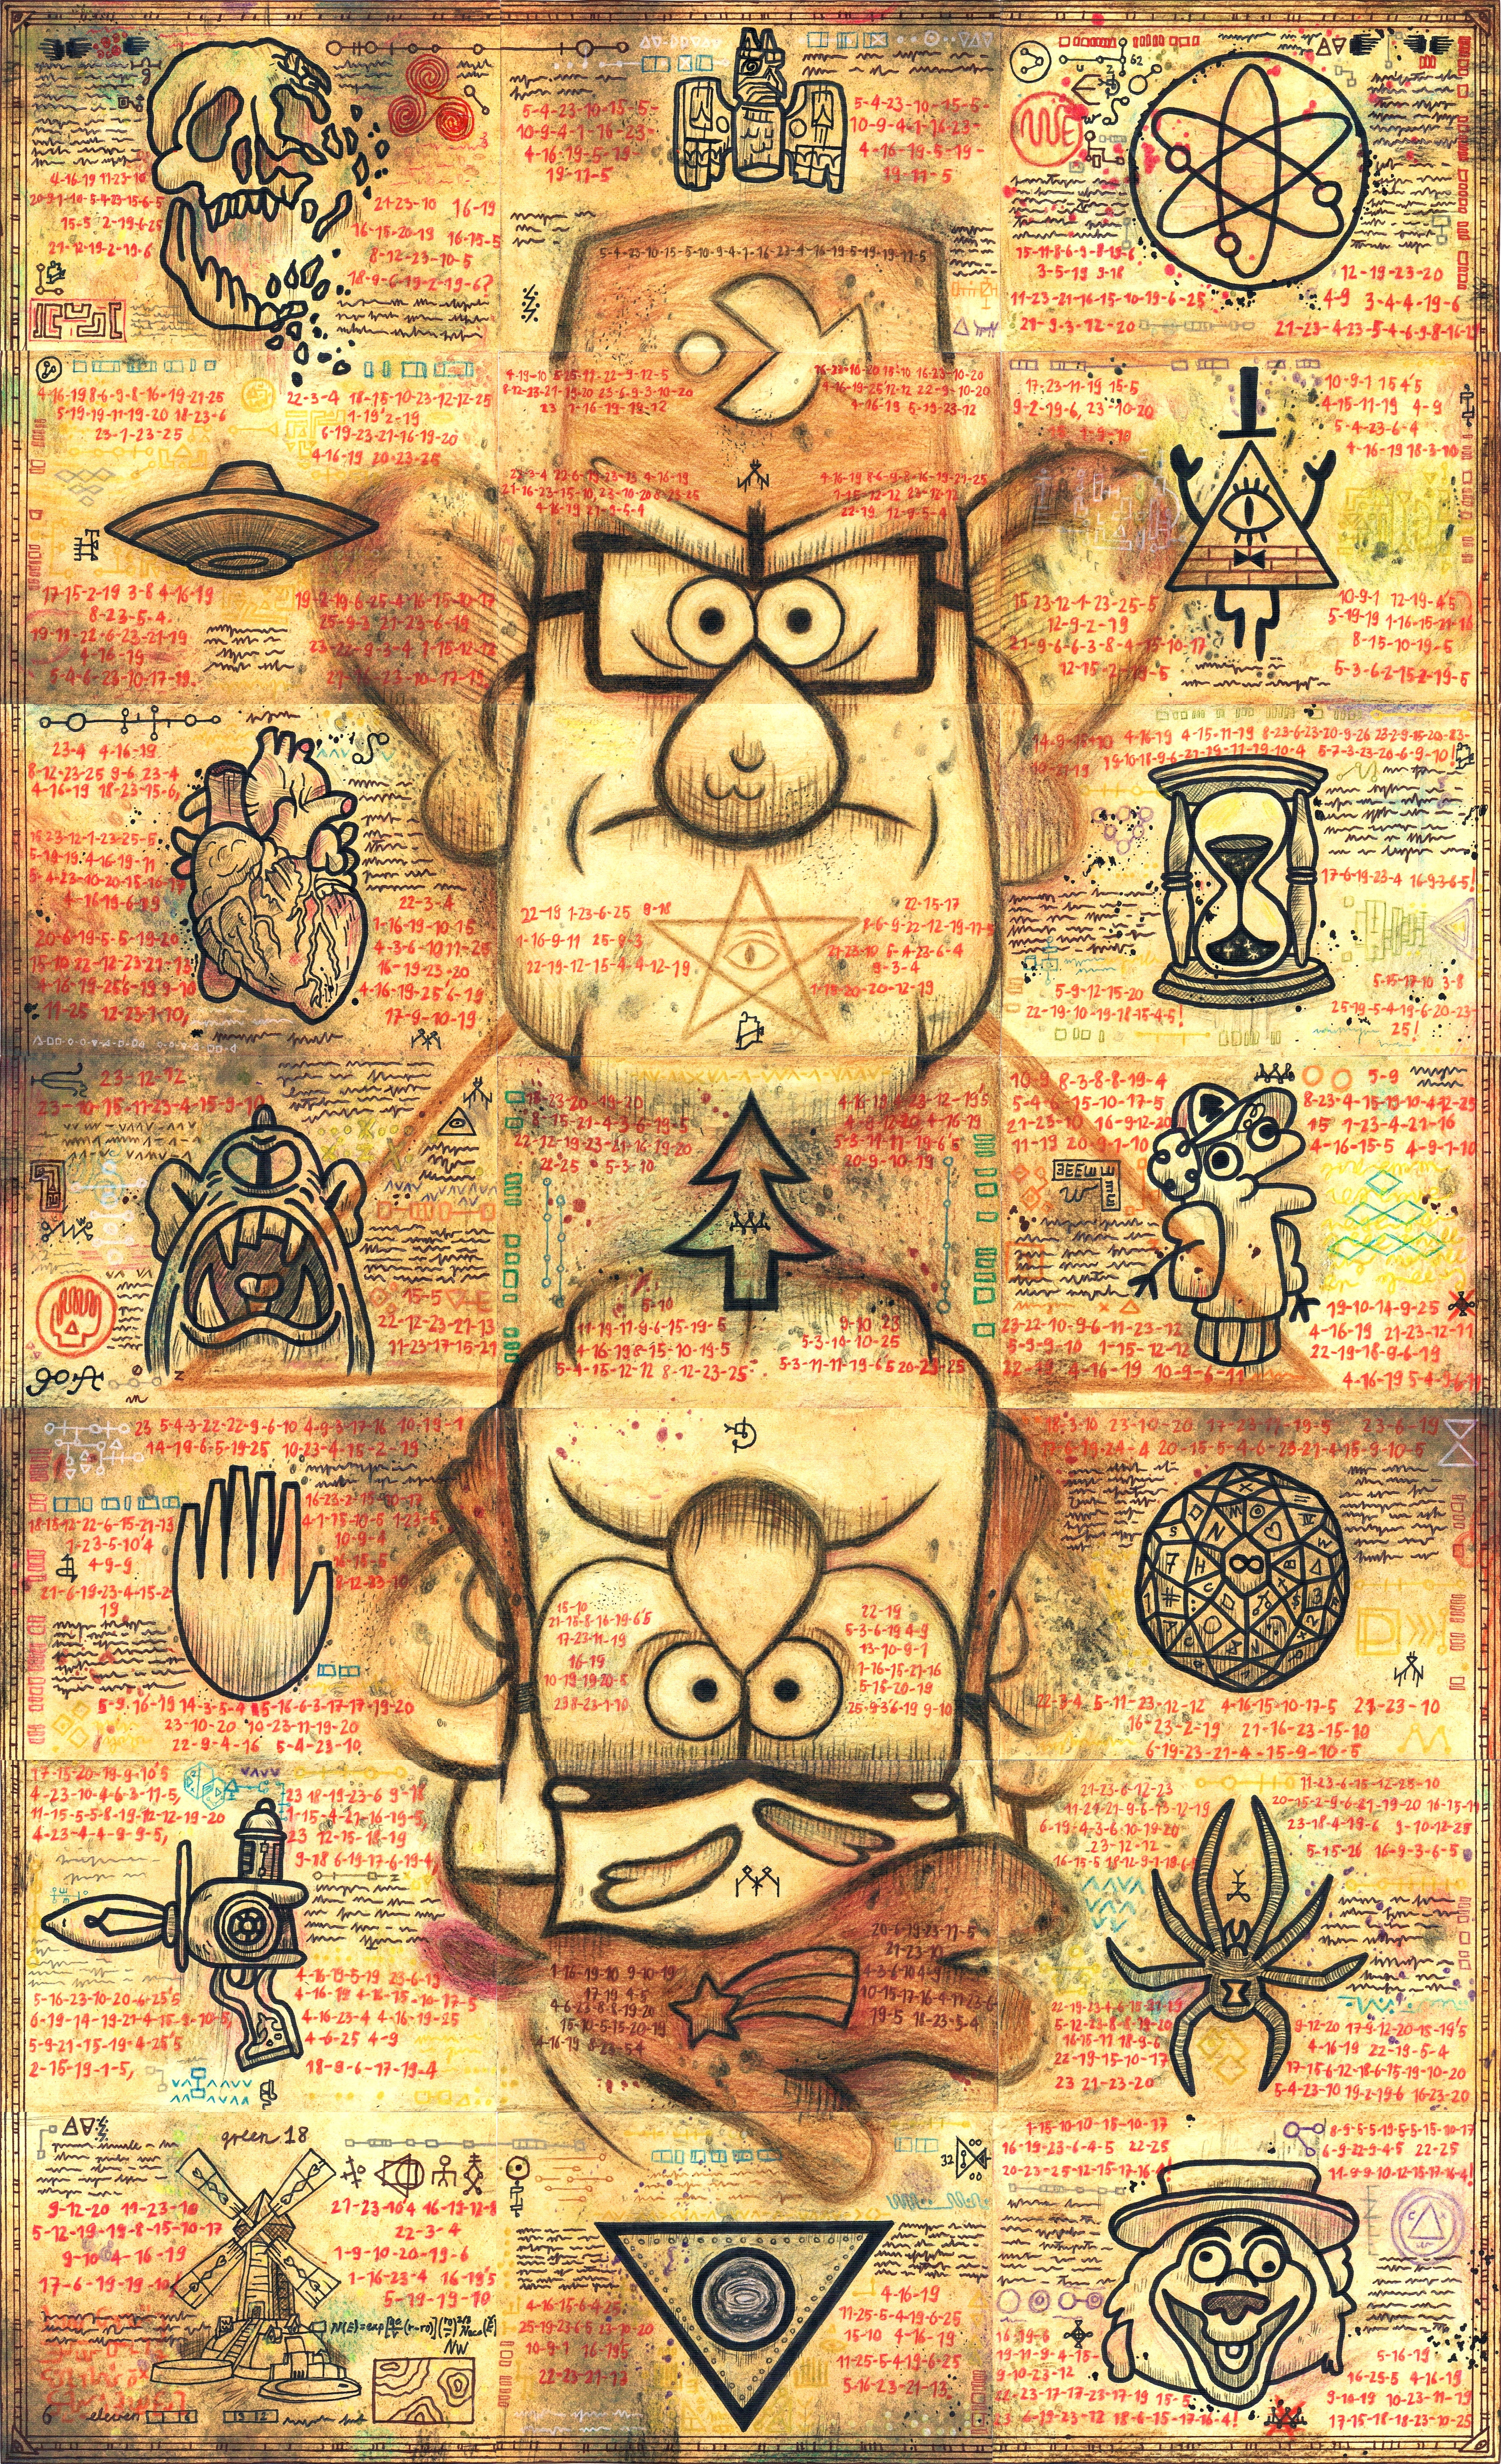 Completed Gravity Falls Season 2 Endpage By Magicofgames On Deviantart